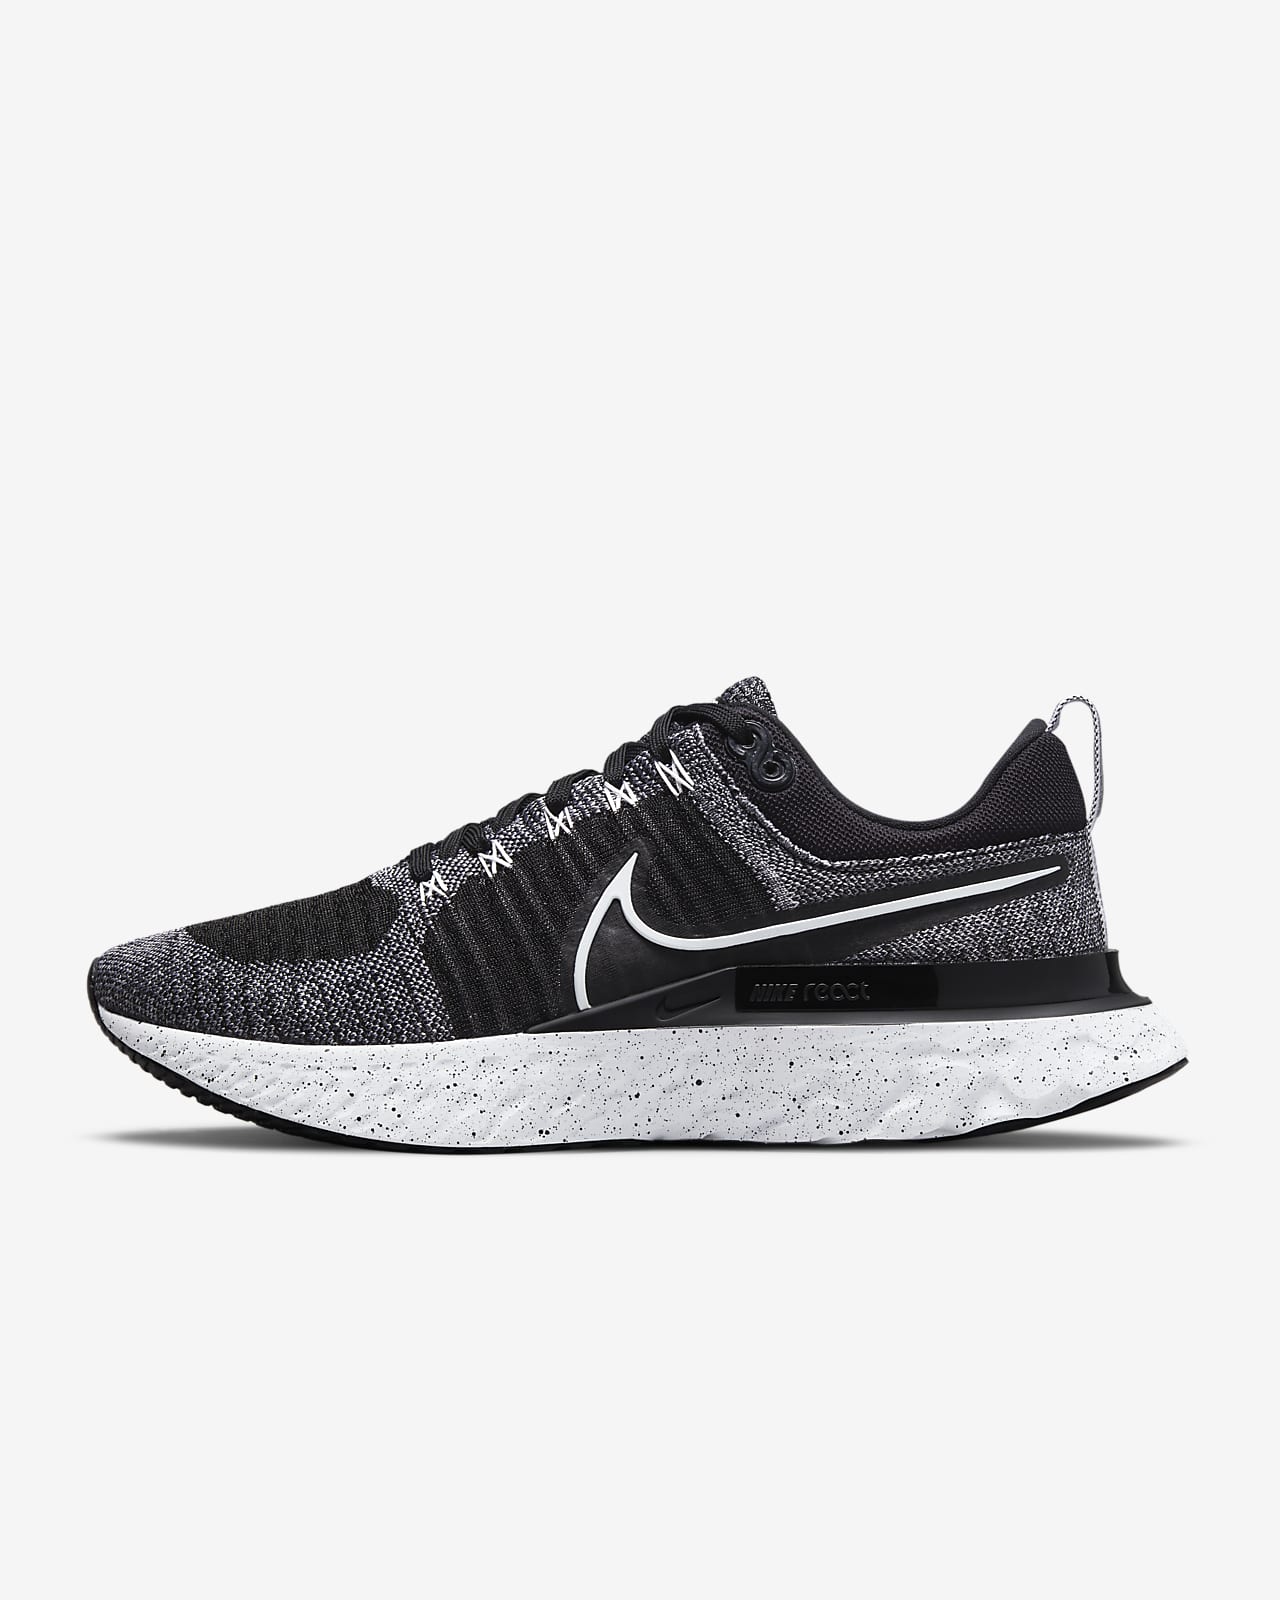 Chaussure de running sur route Nike React Infinity Run Flyknit 2 pour Homme